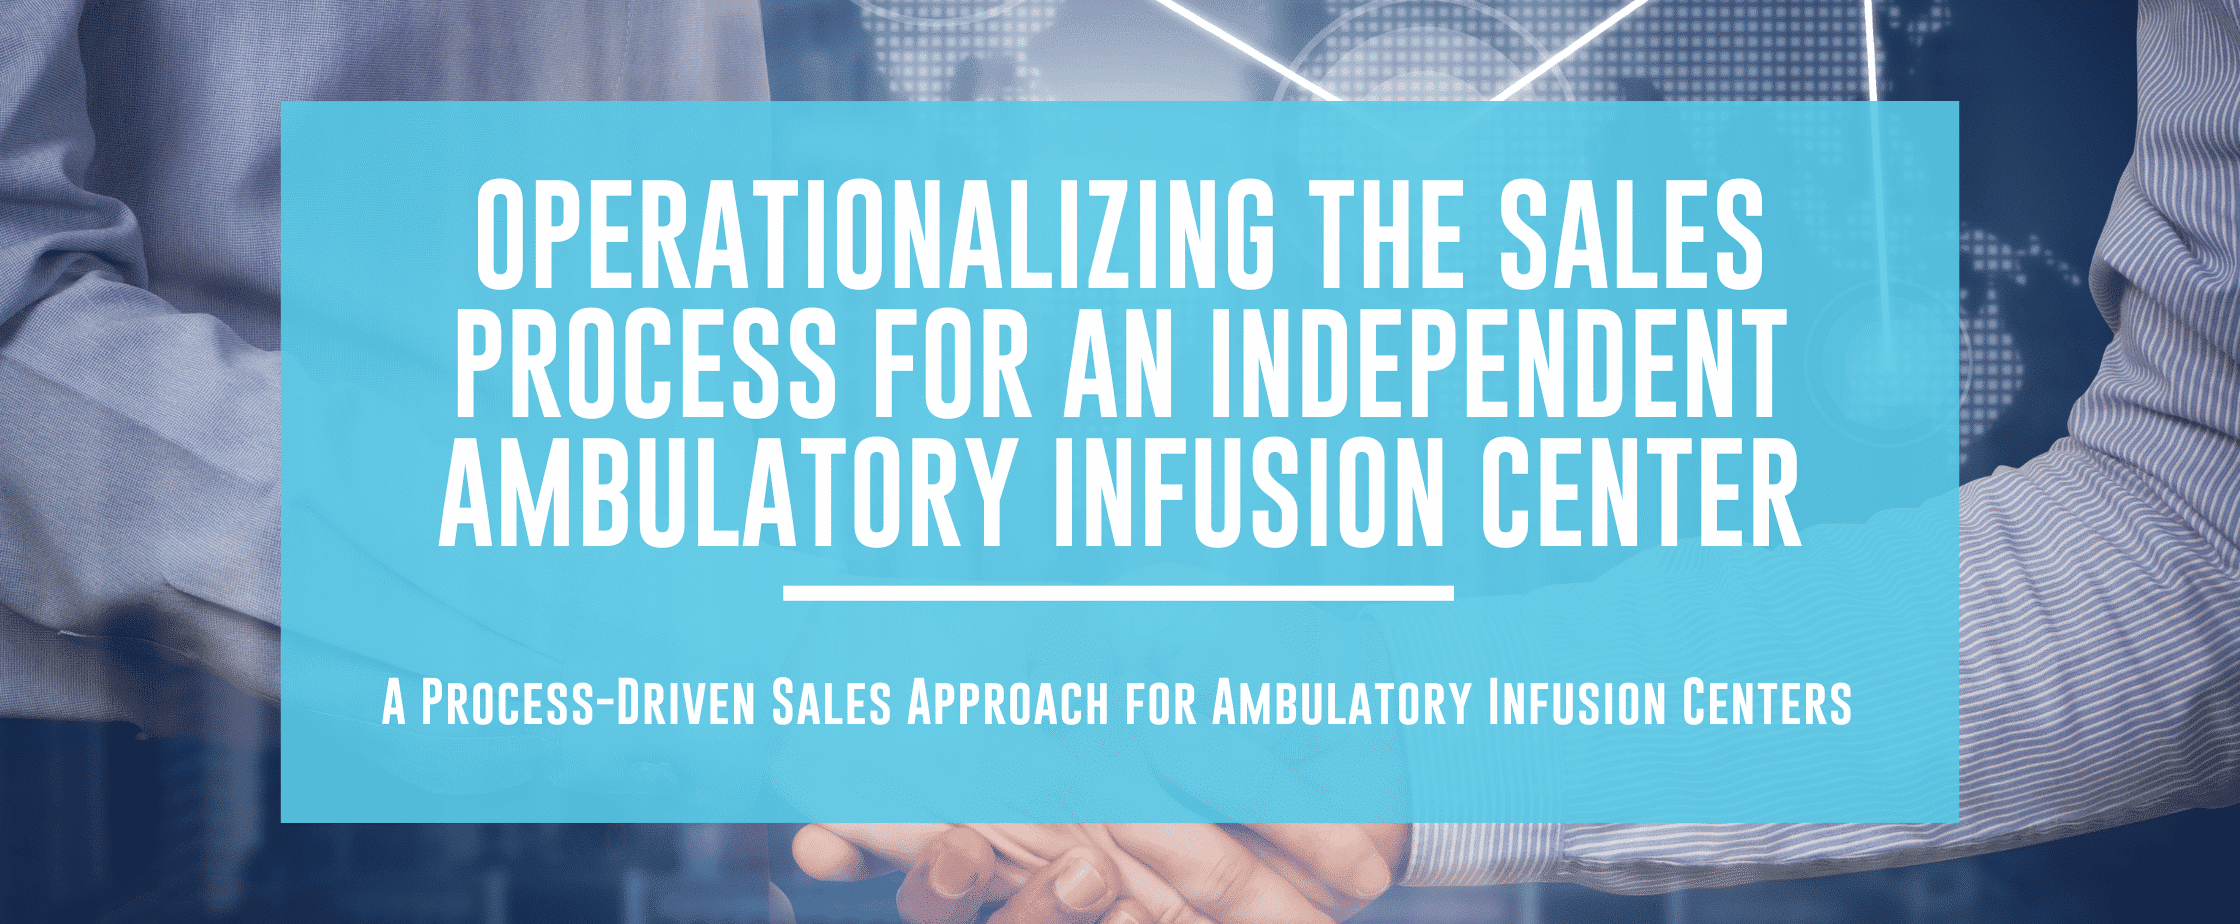 Featured image for Operationalizing the Sales Process for an Independent Ambulatory Infusion Center